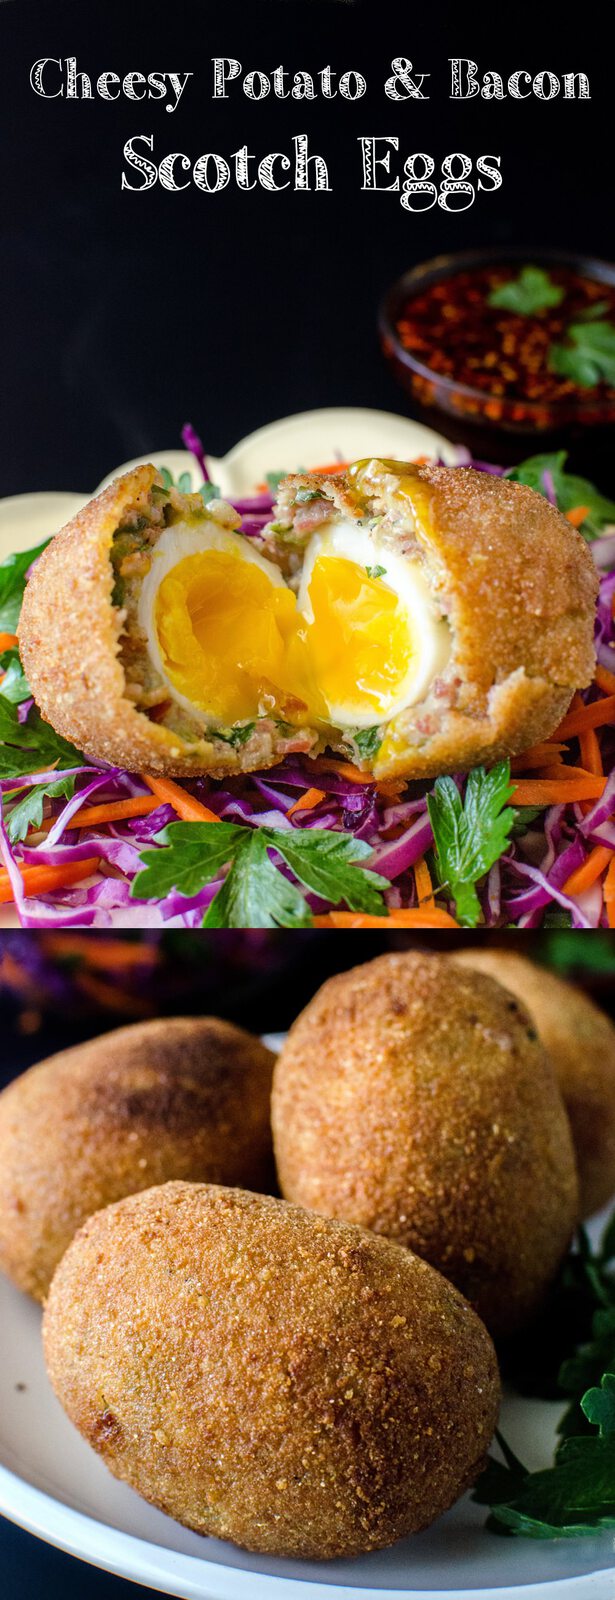 Cheesy Potato & Bacon Scotch Eggs. Make your Scotch eggs extra special with Cheese, Potato, Bacon and a generous amount of herbs! Perfect Brunch or Breakfast Eggs.